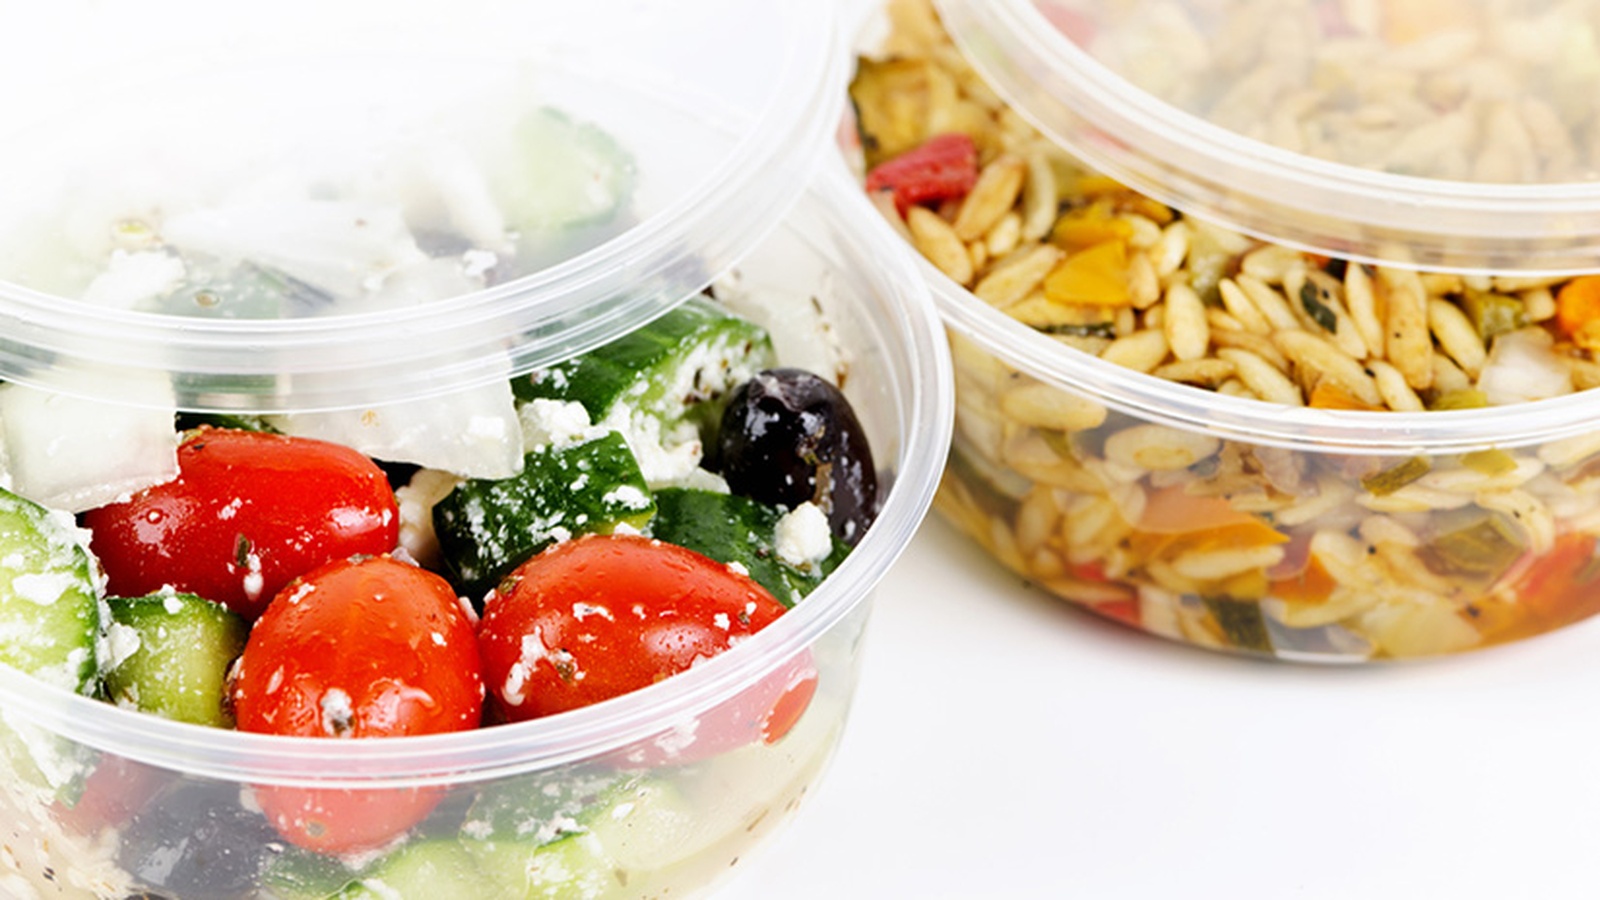 5 Reasons To Avoid Plastic Containers